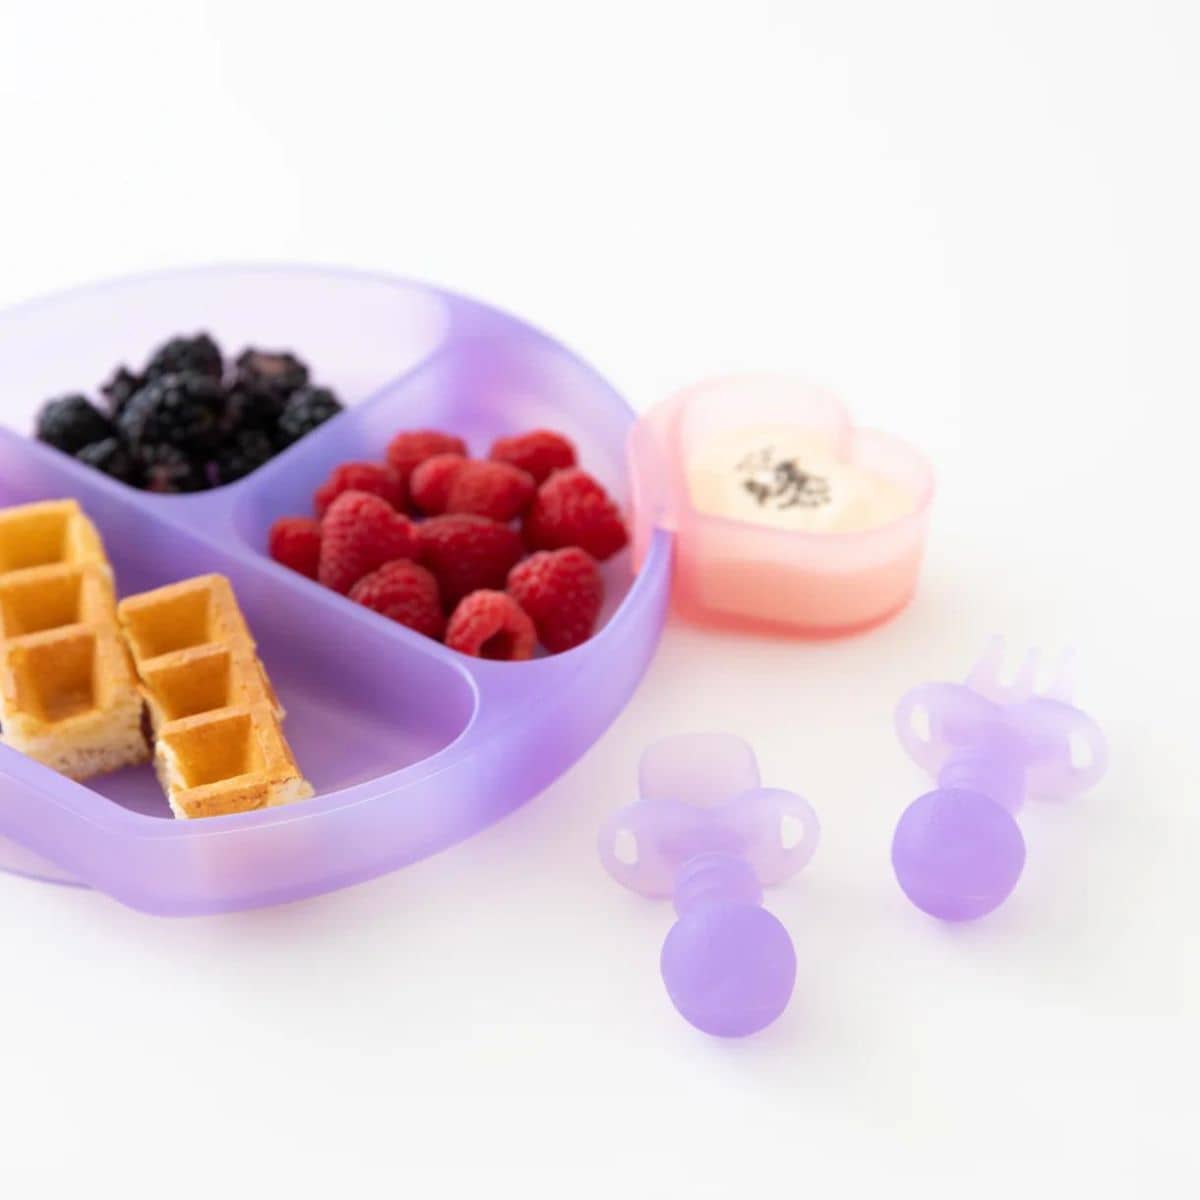 Bumkins Silicone Chewtensils - Jelly Silicone